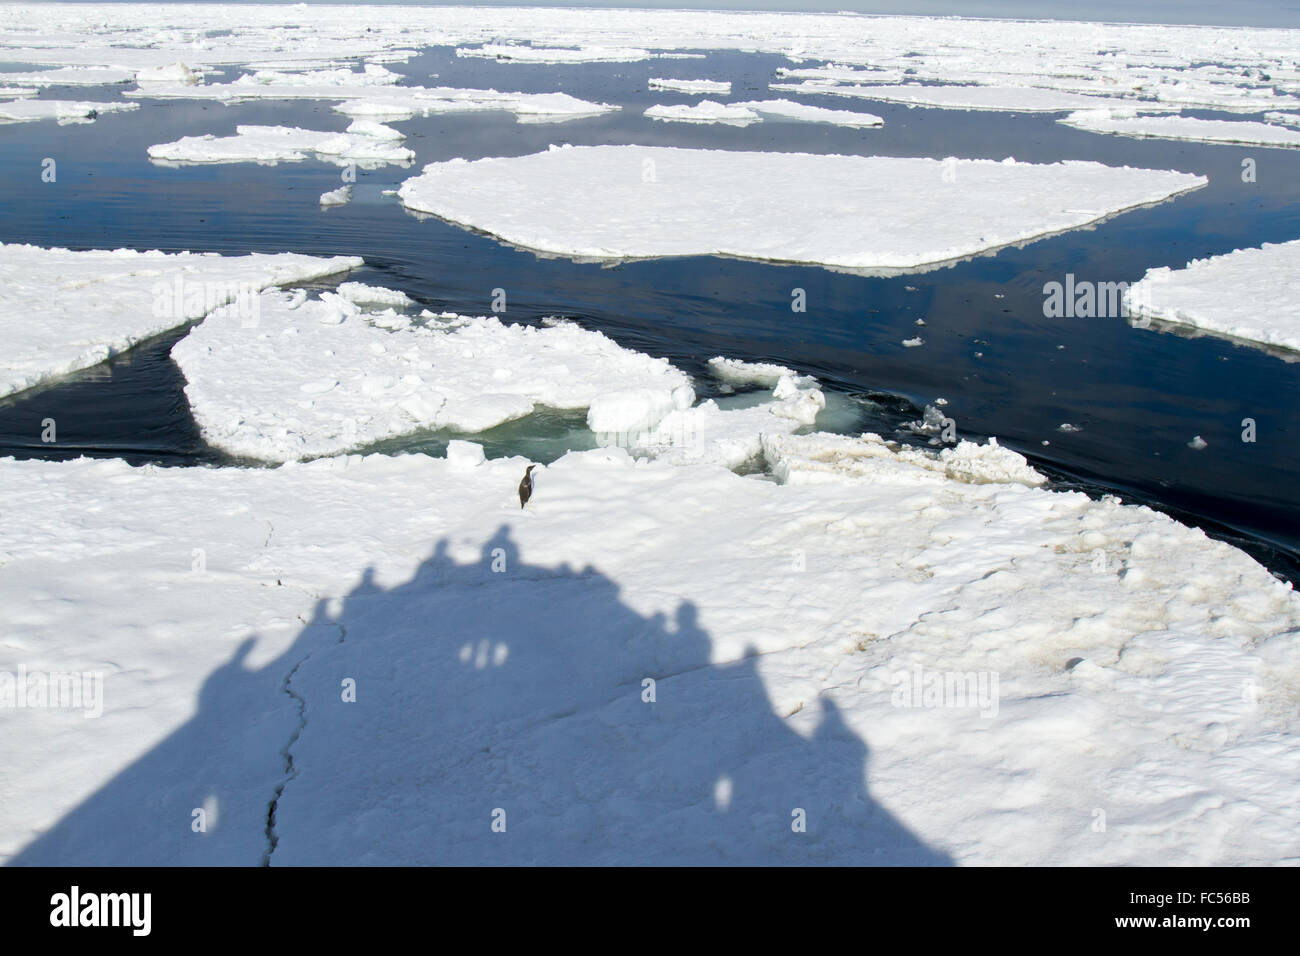 Shadow of cruise ship with passengers ramming ice floe with adelie penguin in Antarctica. Stock Photo